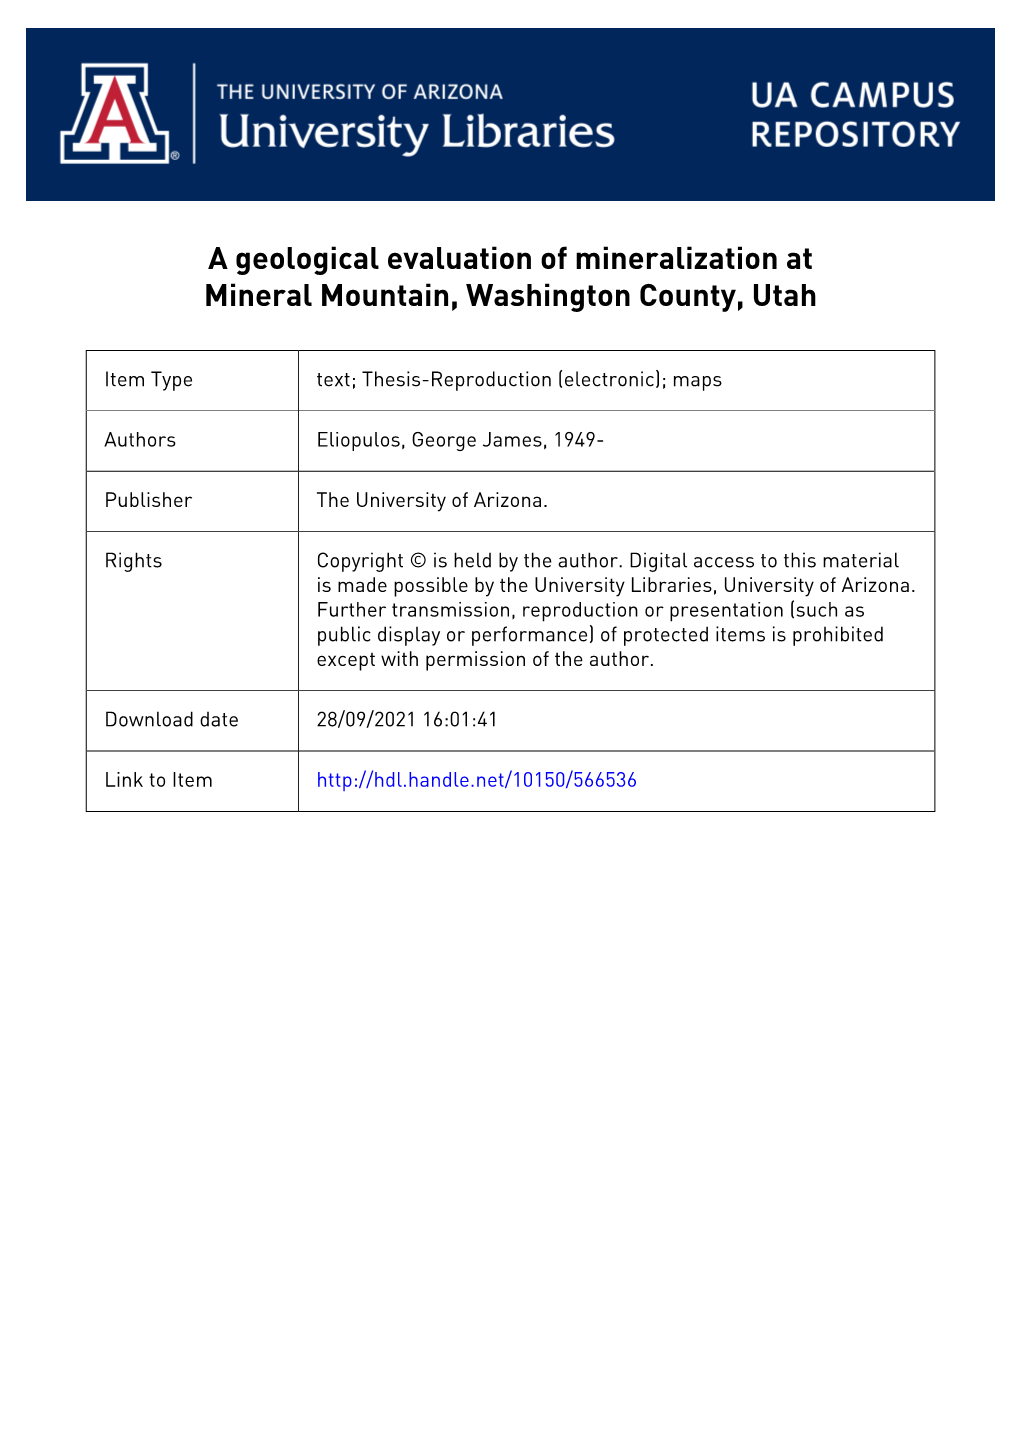 A Geological Evaluation of Mineralization at Mineral Mountain, Washington County, Utah